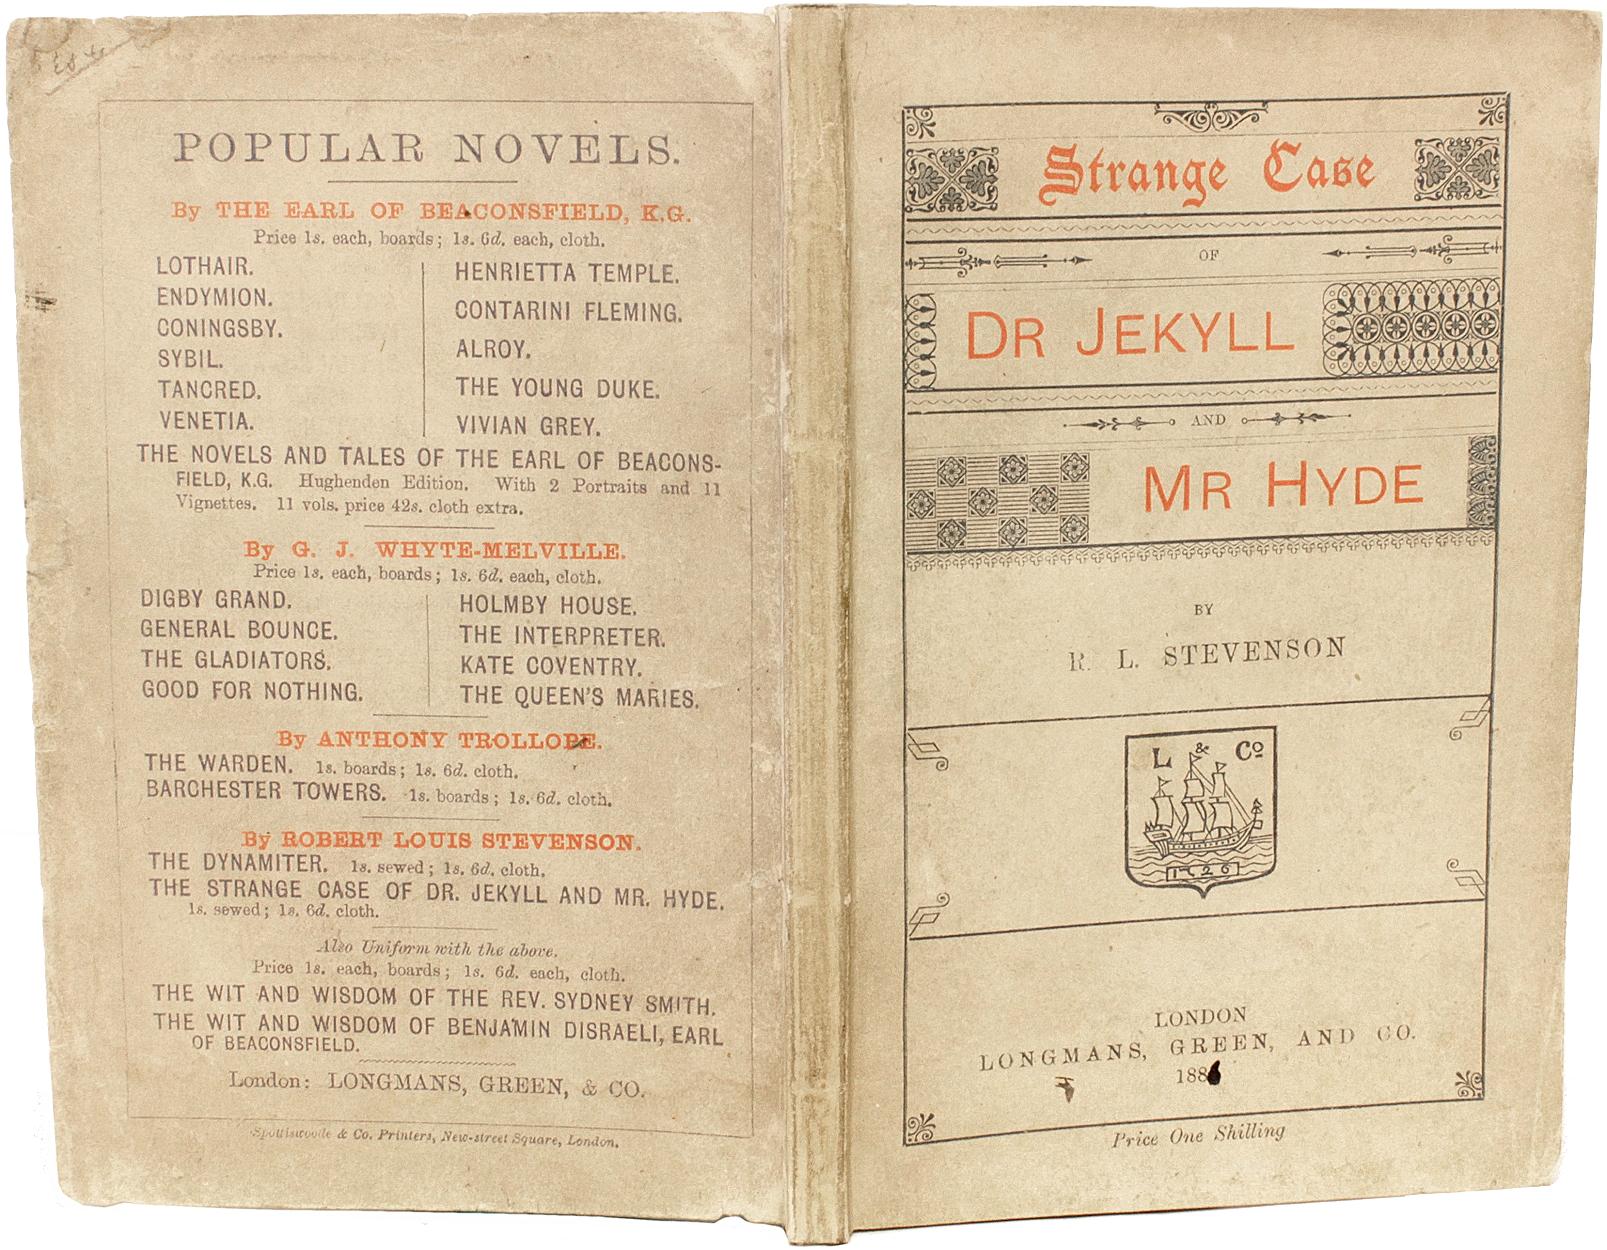 AUTHOR: STEVENSON, Robert Lewis

TITLE: Strange Case of Dr. Jekyll and Mr. Hyde.

PUBLISHER: London: Longmans, Green, & Co., 1886.

DESCRIPTION: FIRST LONDON EDITION. 1 vol.. Bound in the publisher's original red and blue printed wrappers,